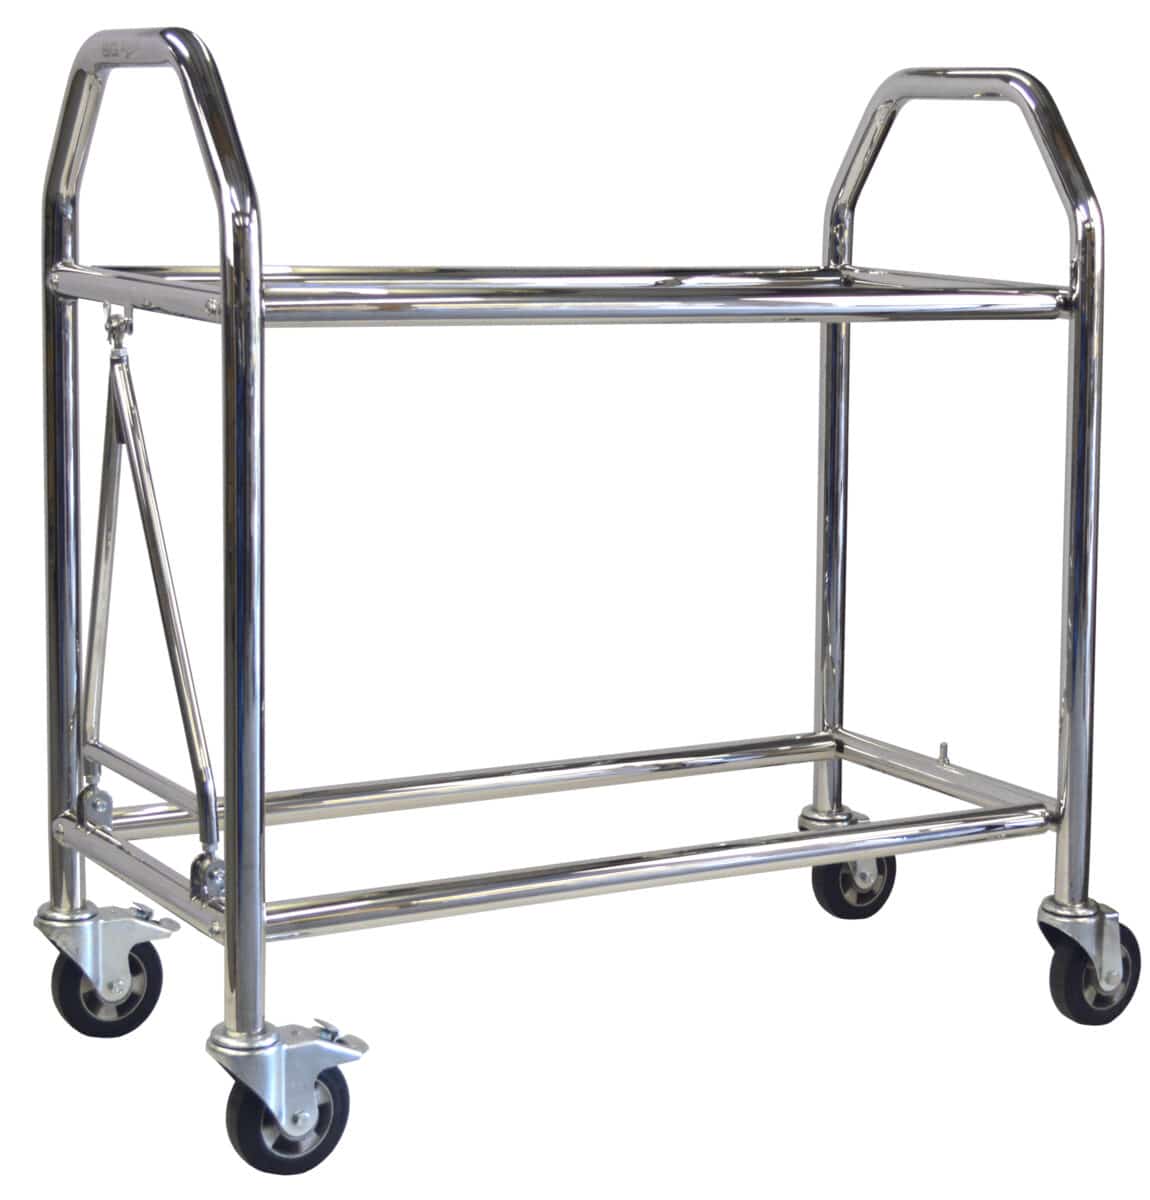 Stainless steel pit trolley